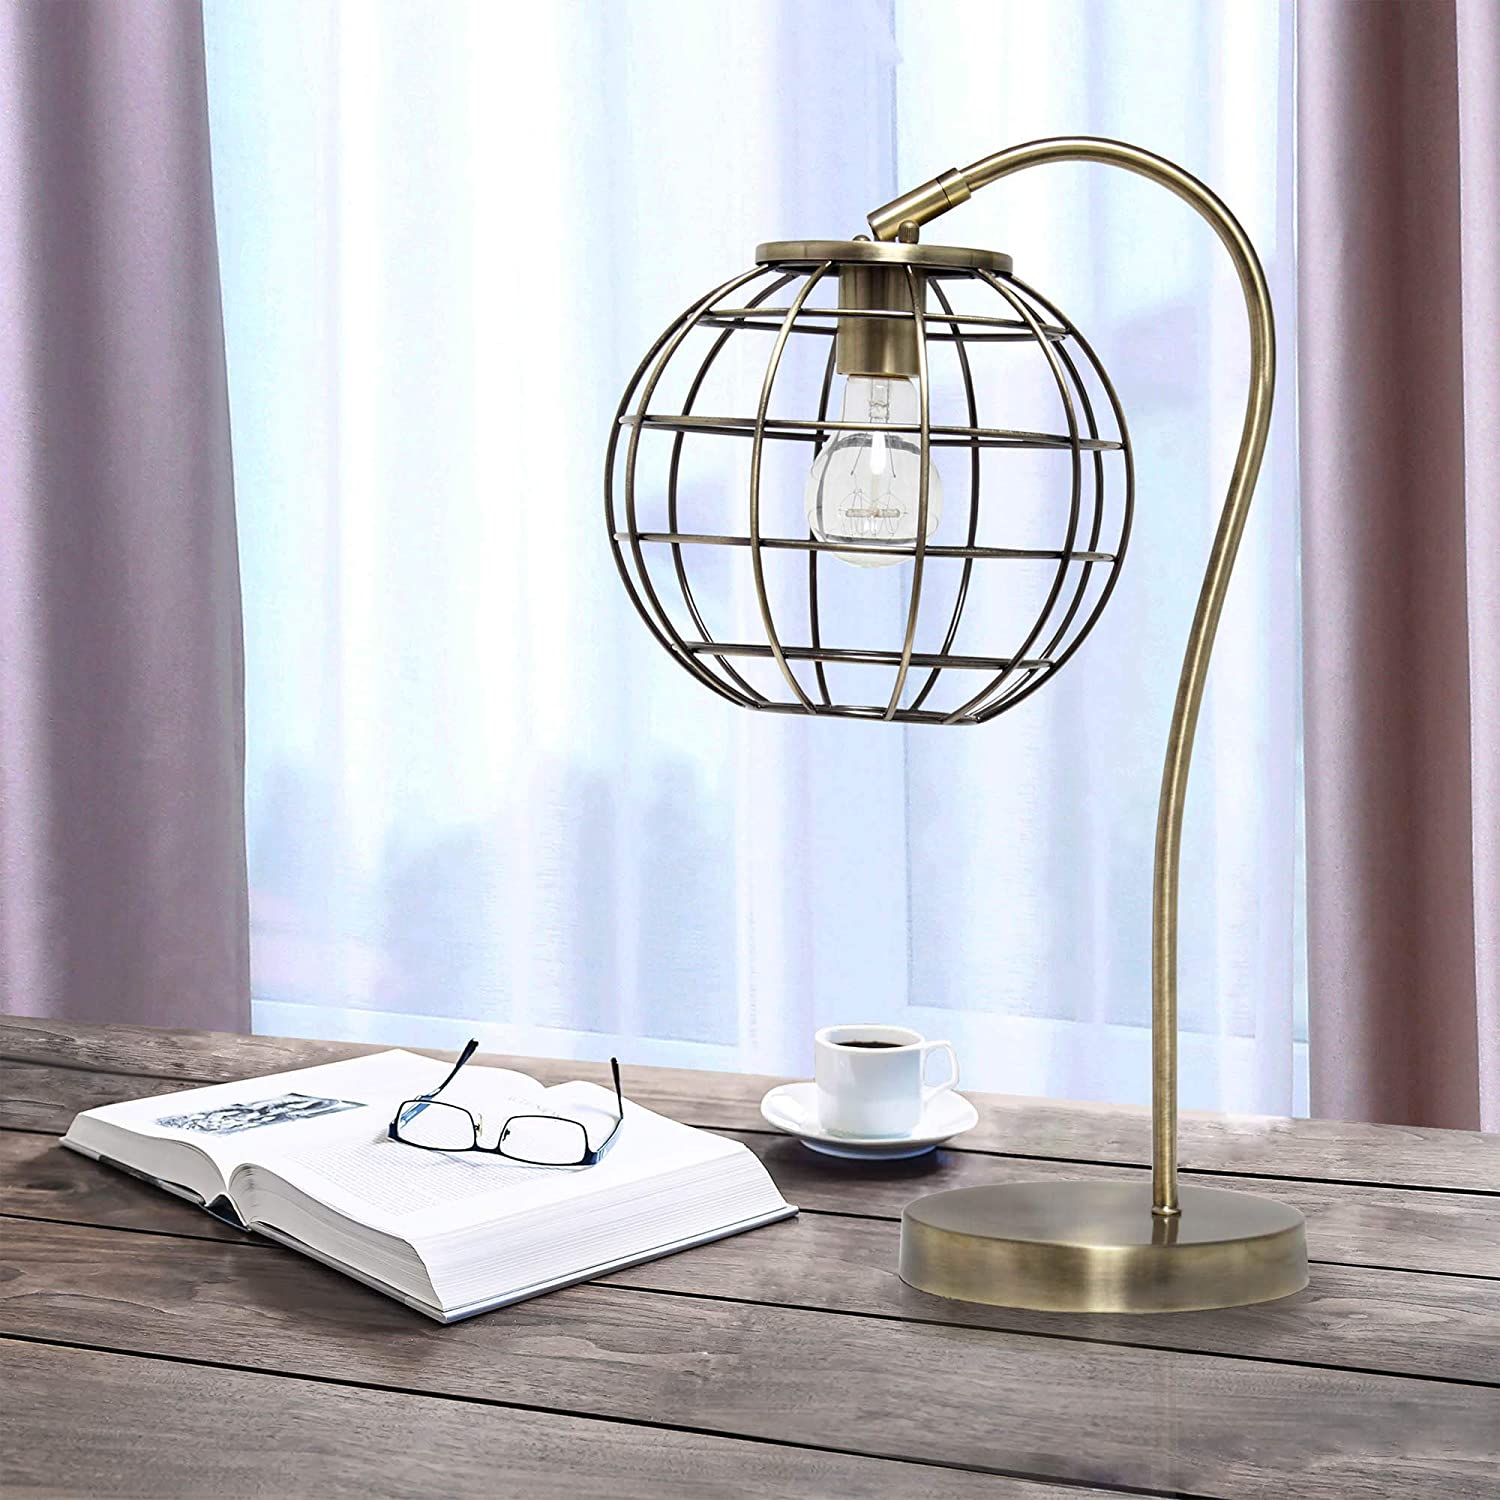 Lalia Home Decorative Arched Metal Cage Table Lamp, Antique Brass